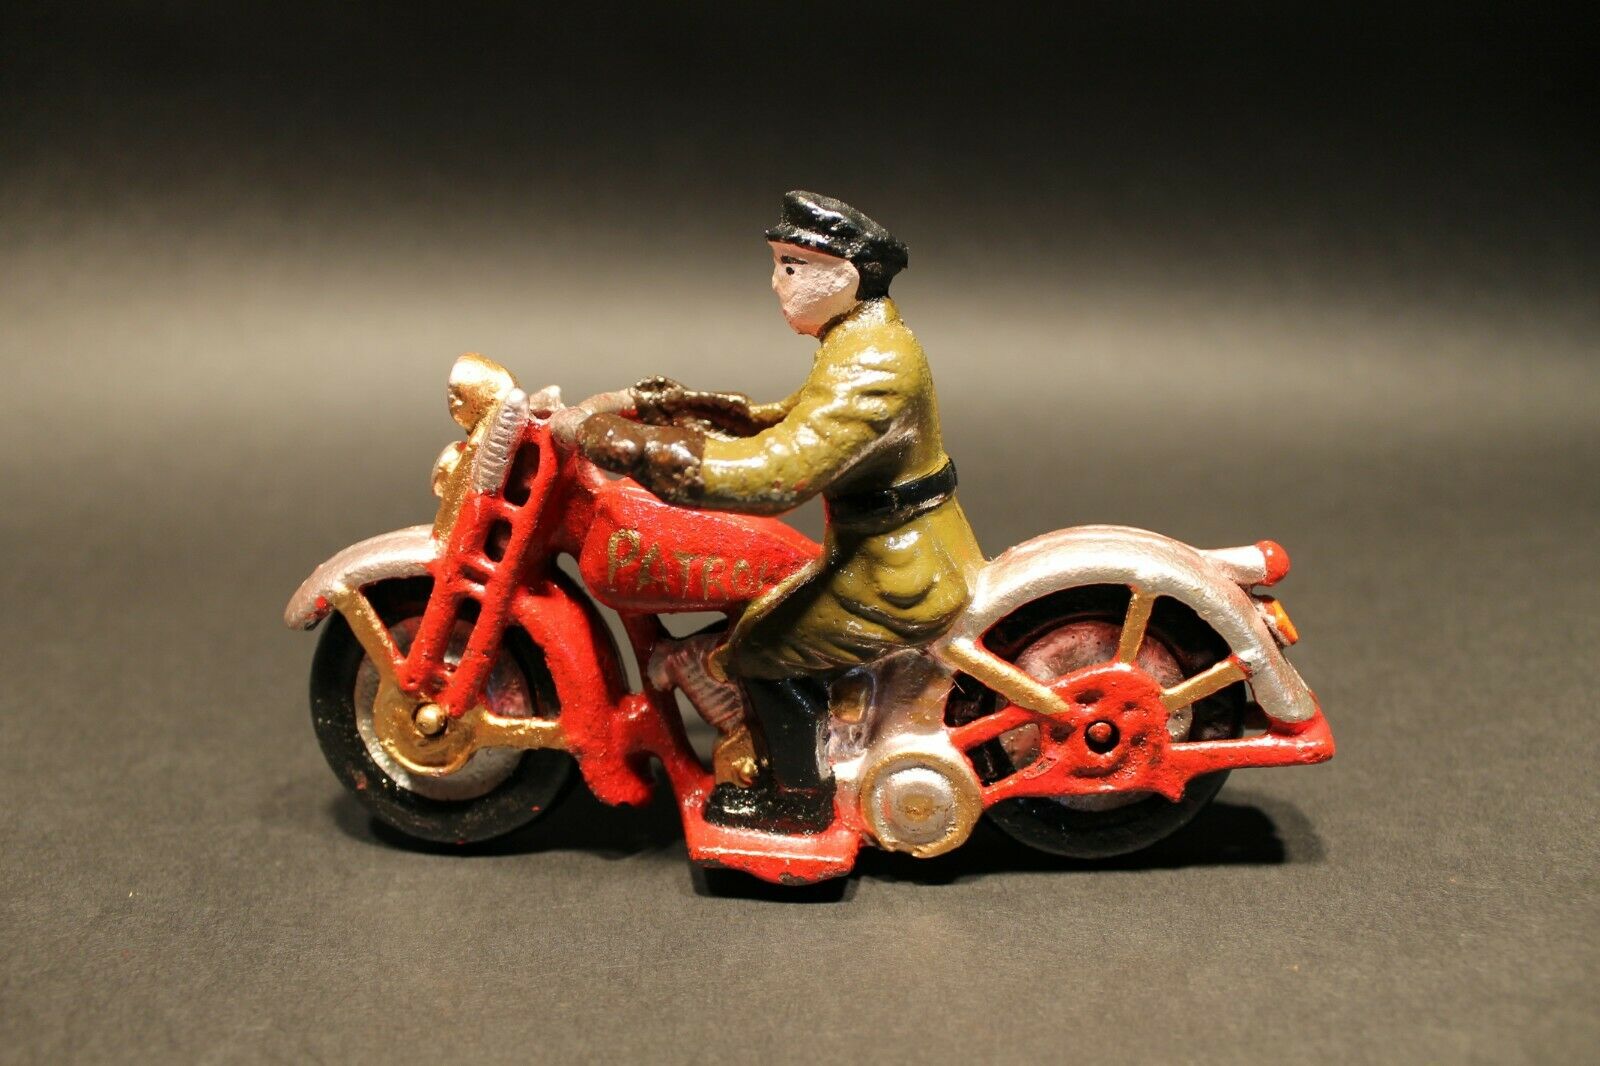 Antique Vintage Style Cast Iron Toy Motorcycle 1 Patrol Rider - Early Home Decor